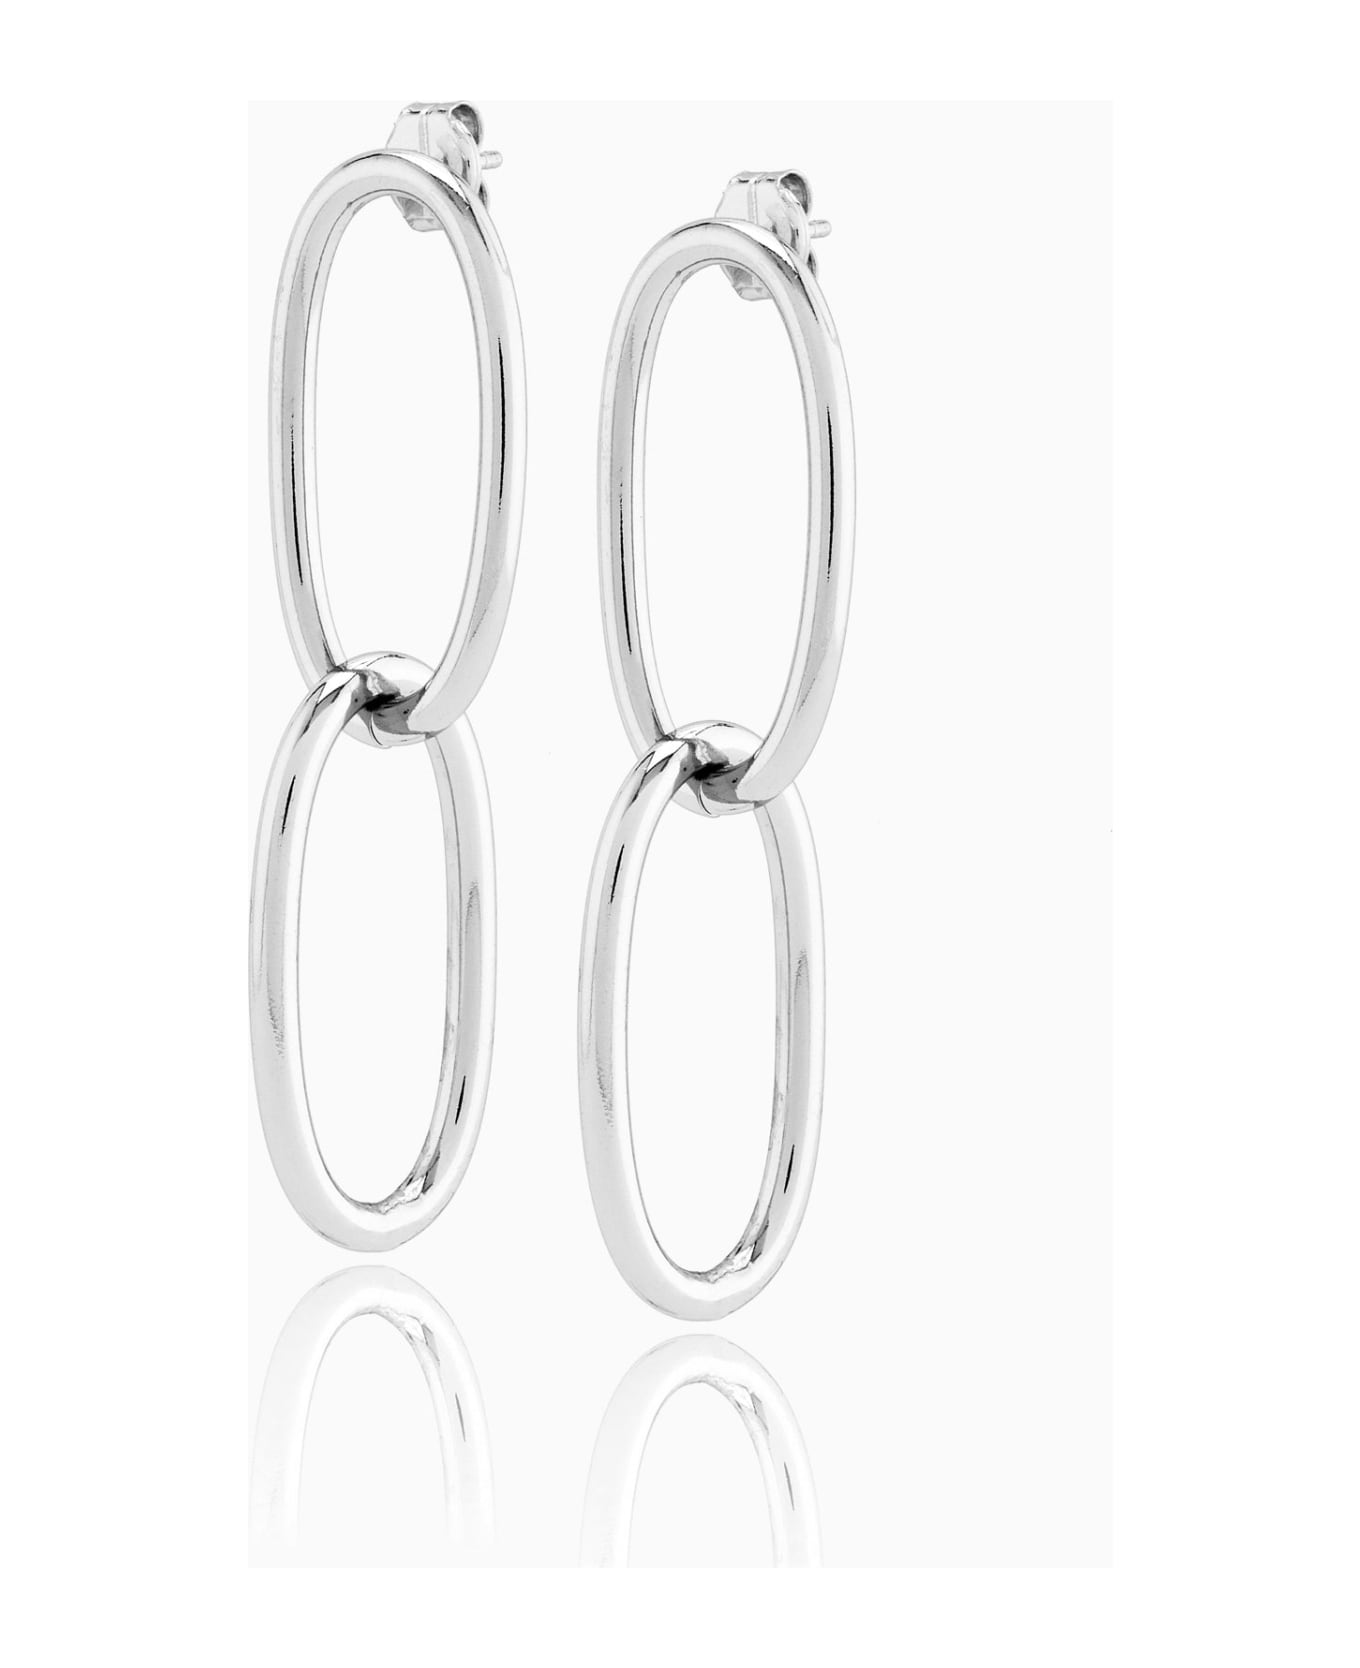 Federica Tosi Earring New Bolt Silver - SILVER